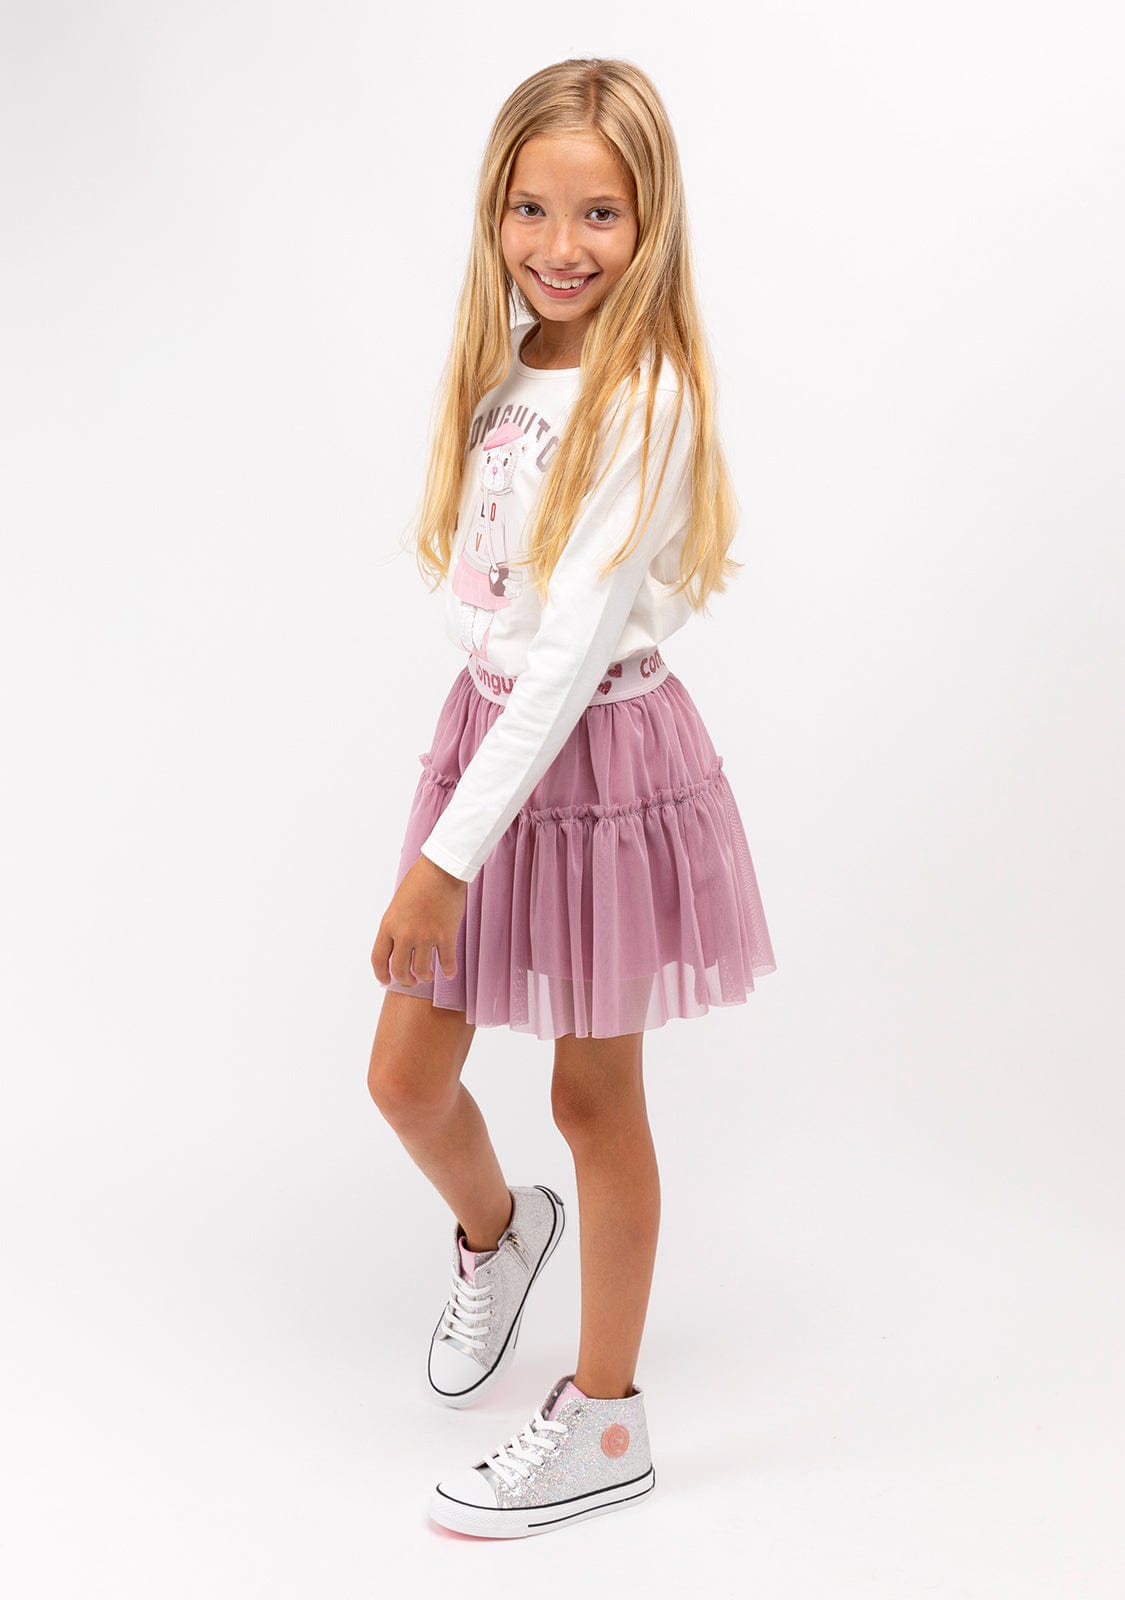 CONGUITOS TEXTIL Clothing Girl's Pink Tulle Conguitos Skirt